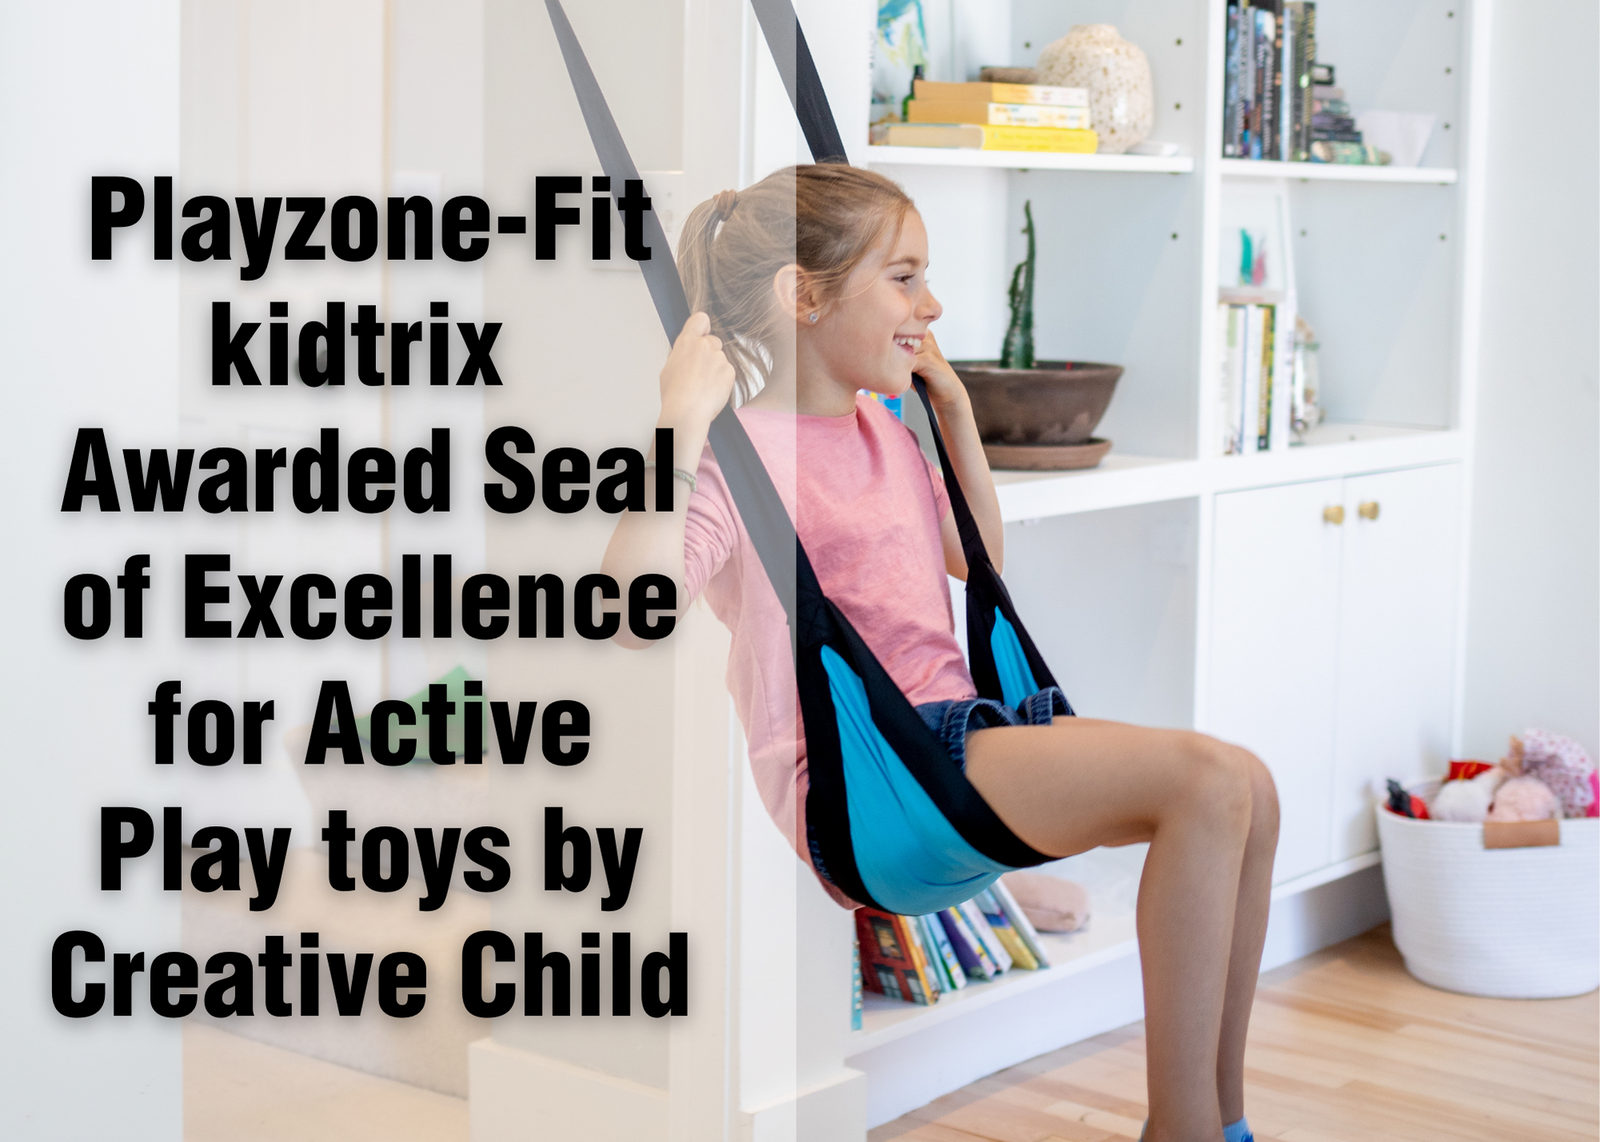 Playzone-Fit kidtrix Awarded Seal of Excellence for Active Play toys by Creative Child